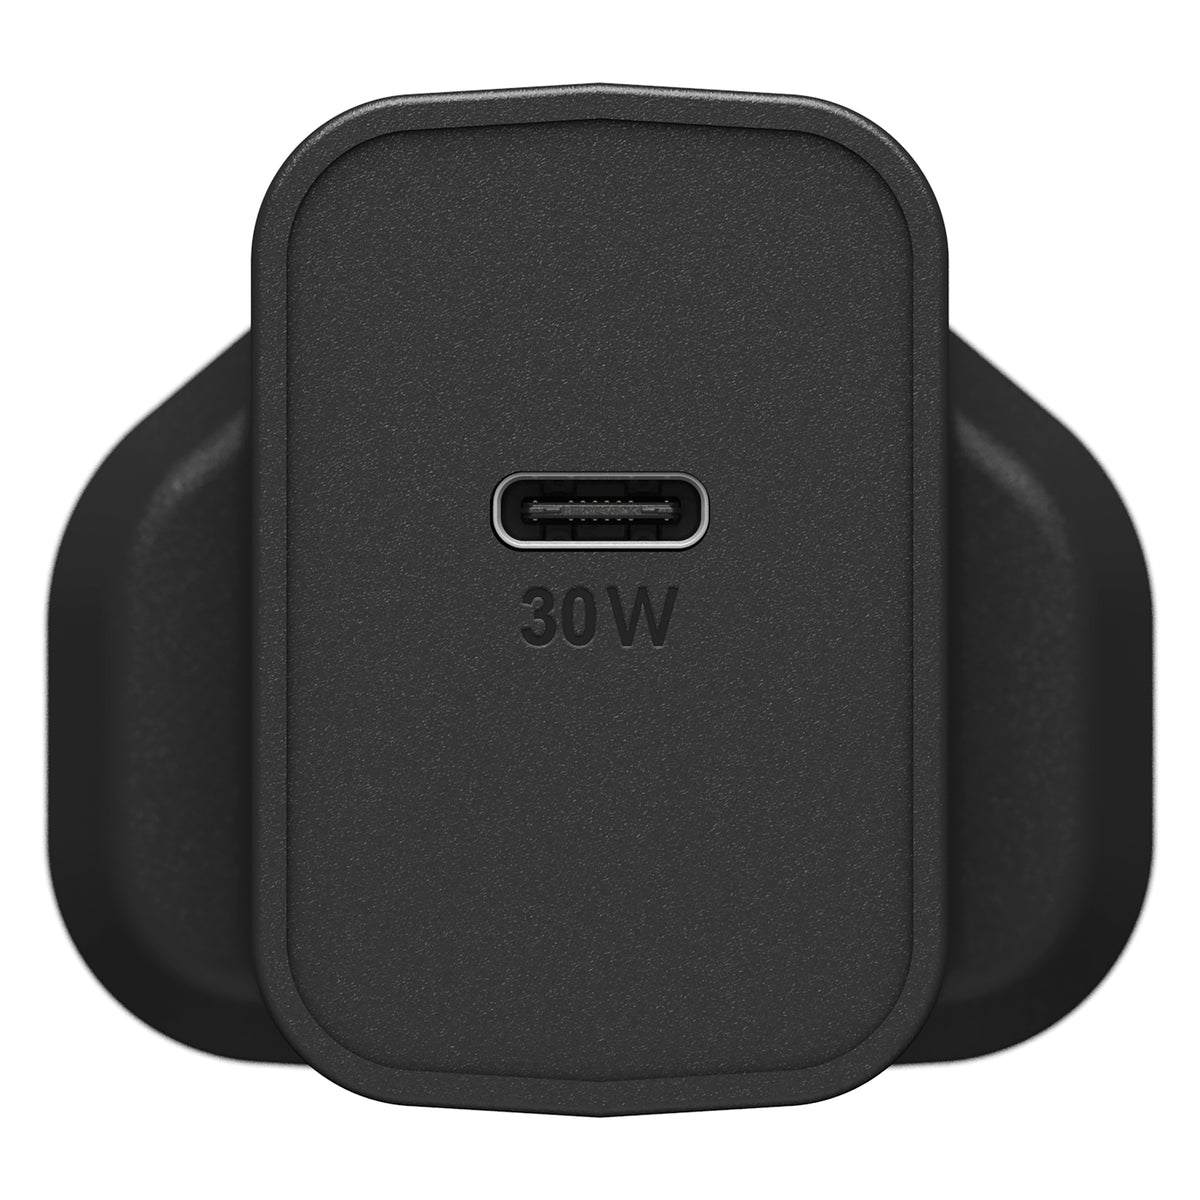 OTTERBOX UK Wall Charger 30W Rugged Fast Compact Charger for USB-C Devices - Black